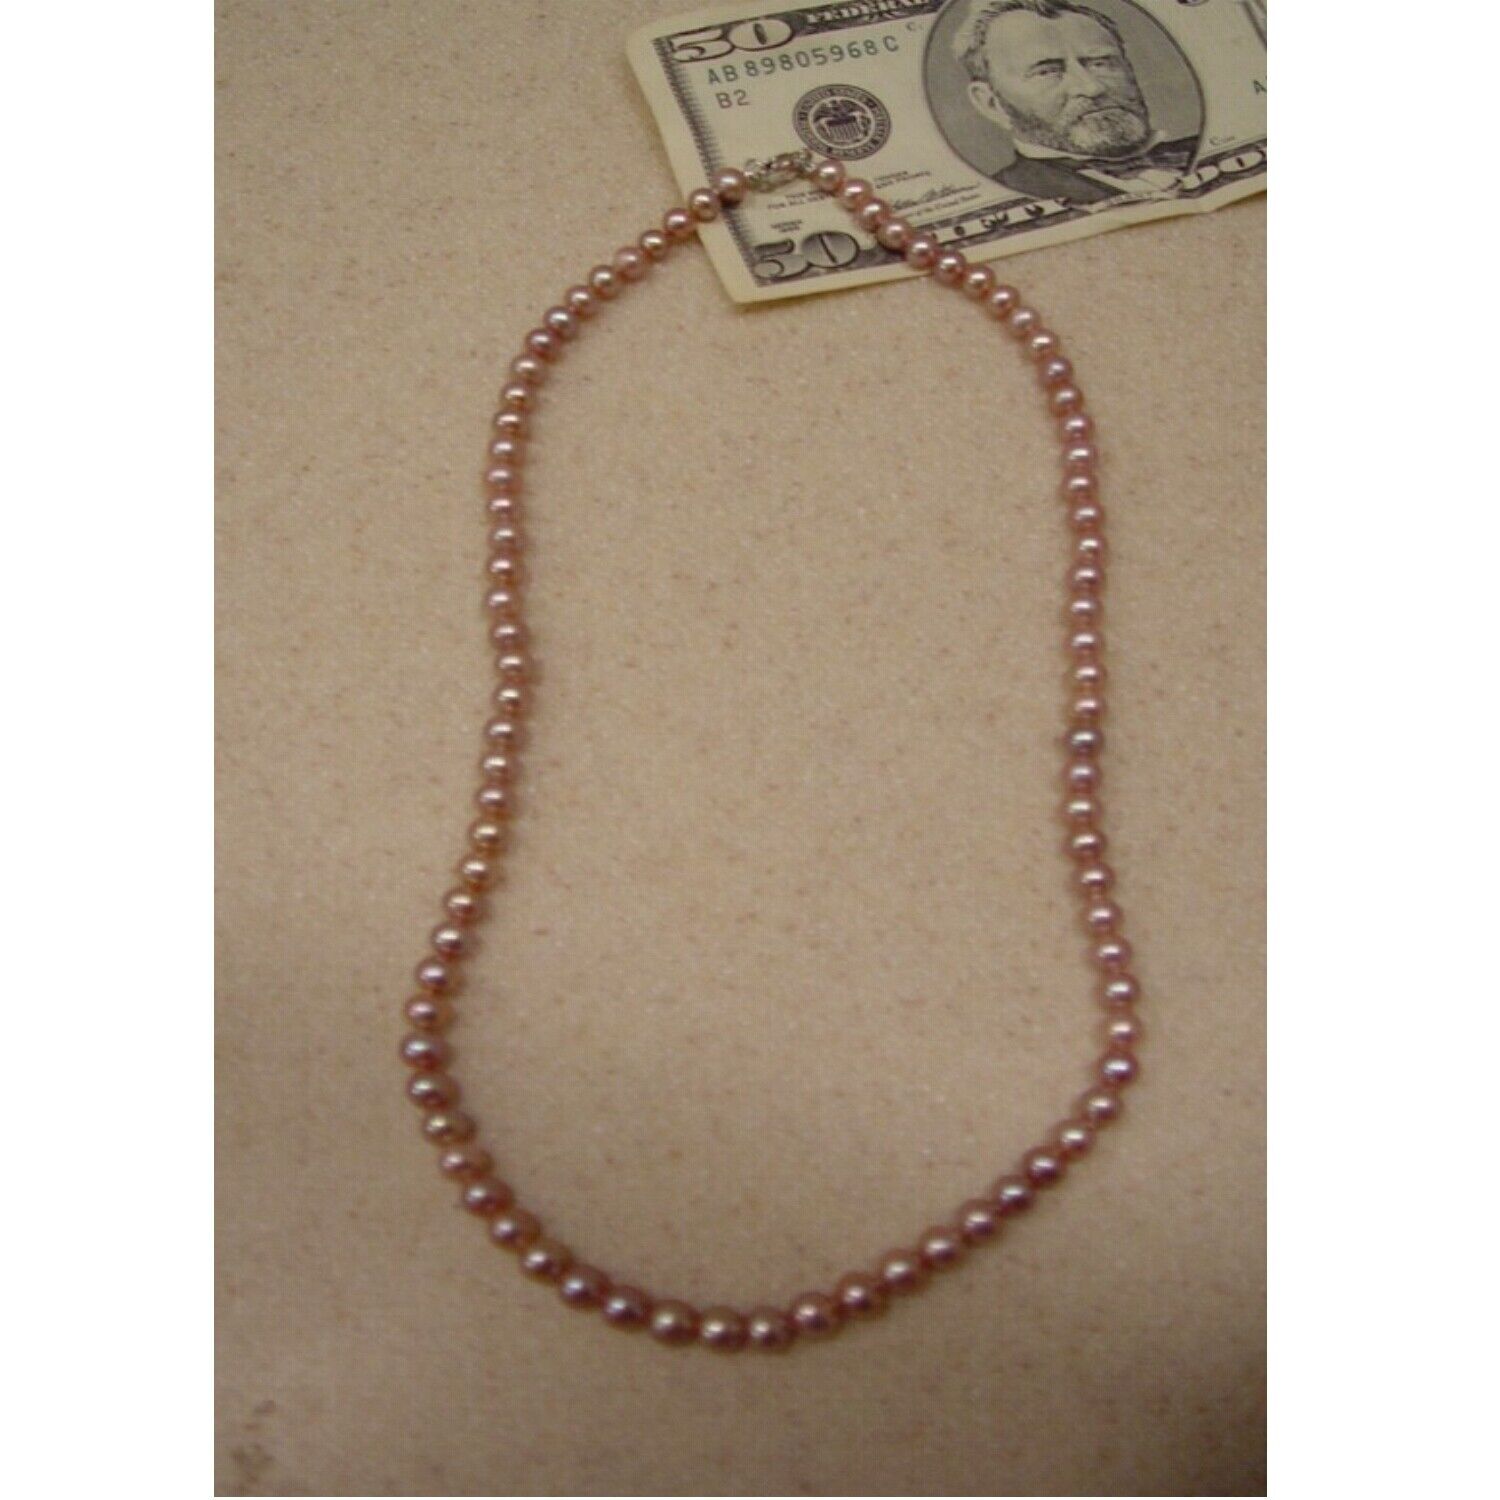 Genuine Pink Pearl Necklace 7 mm 48 Inch